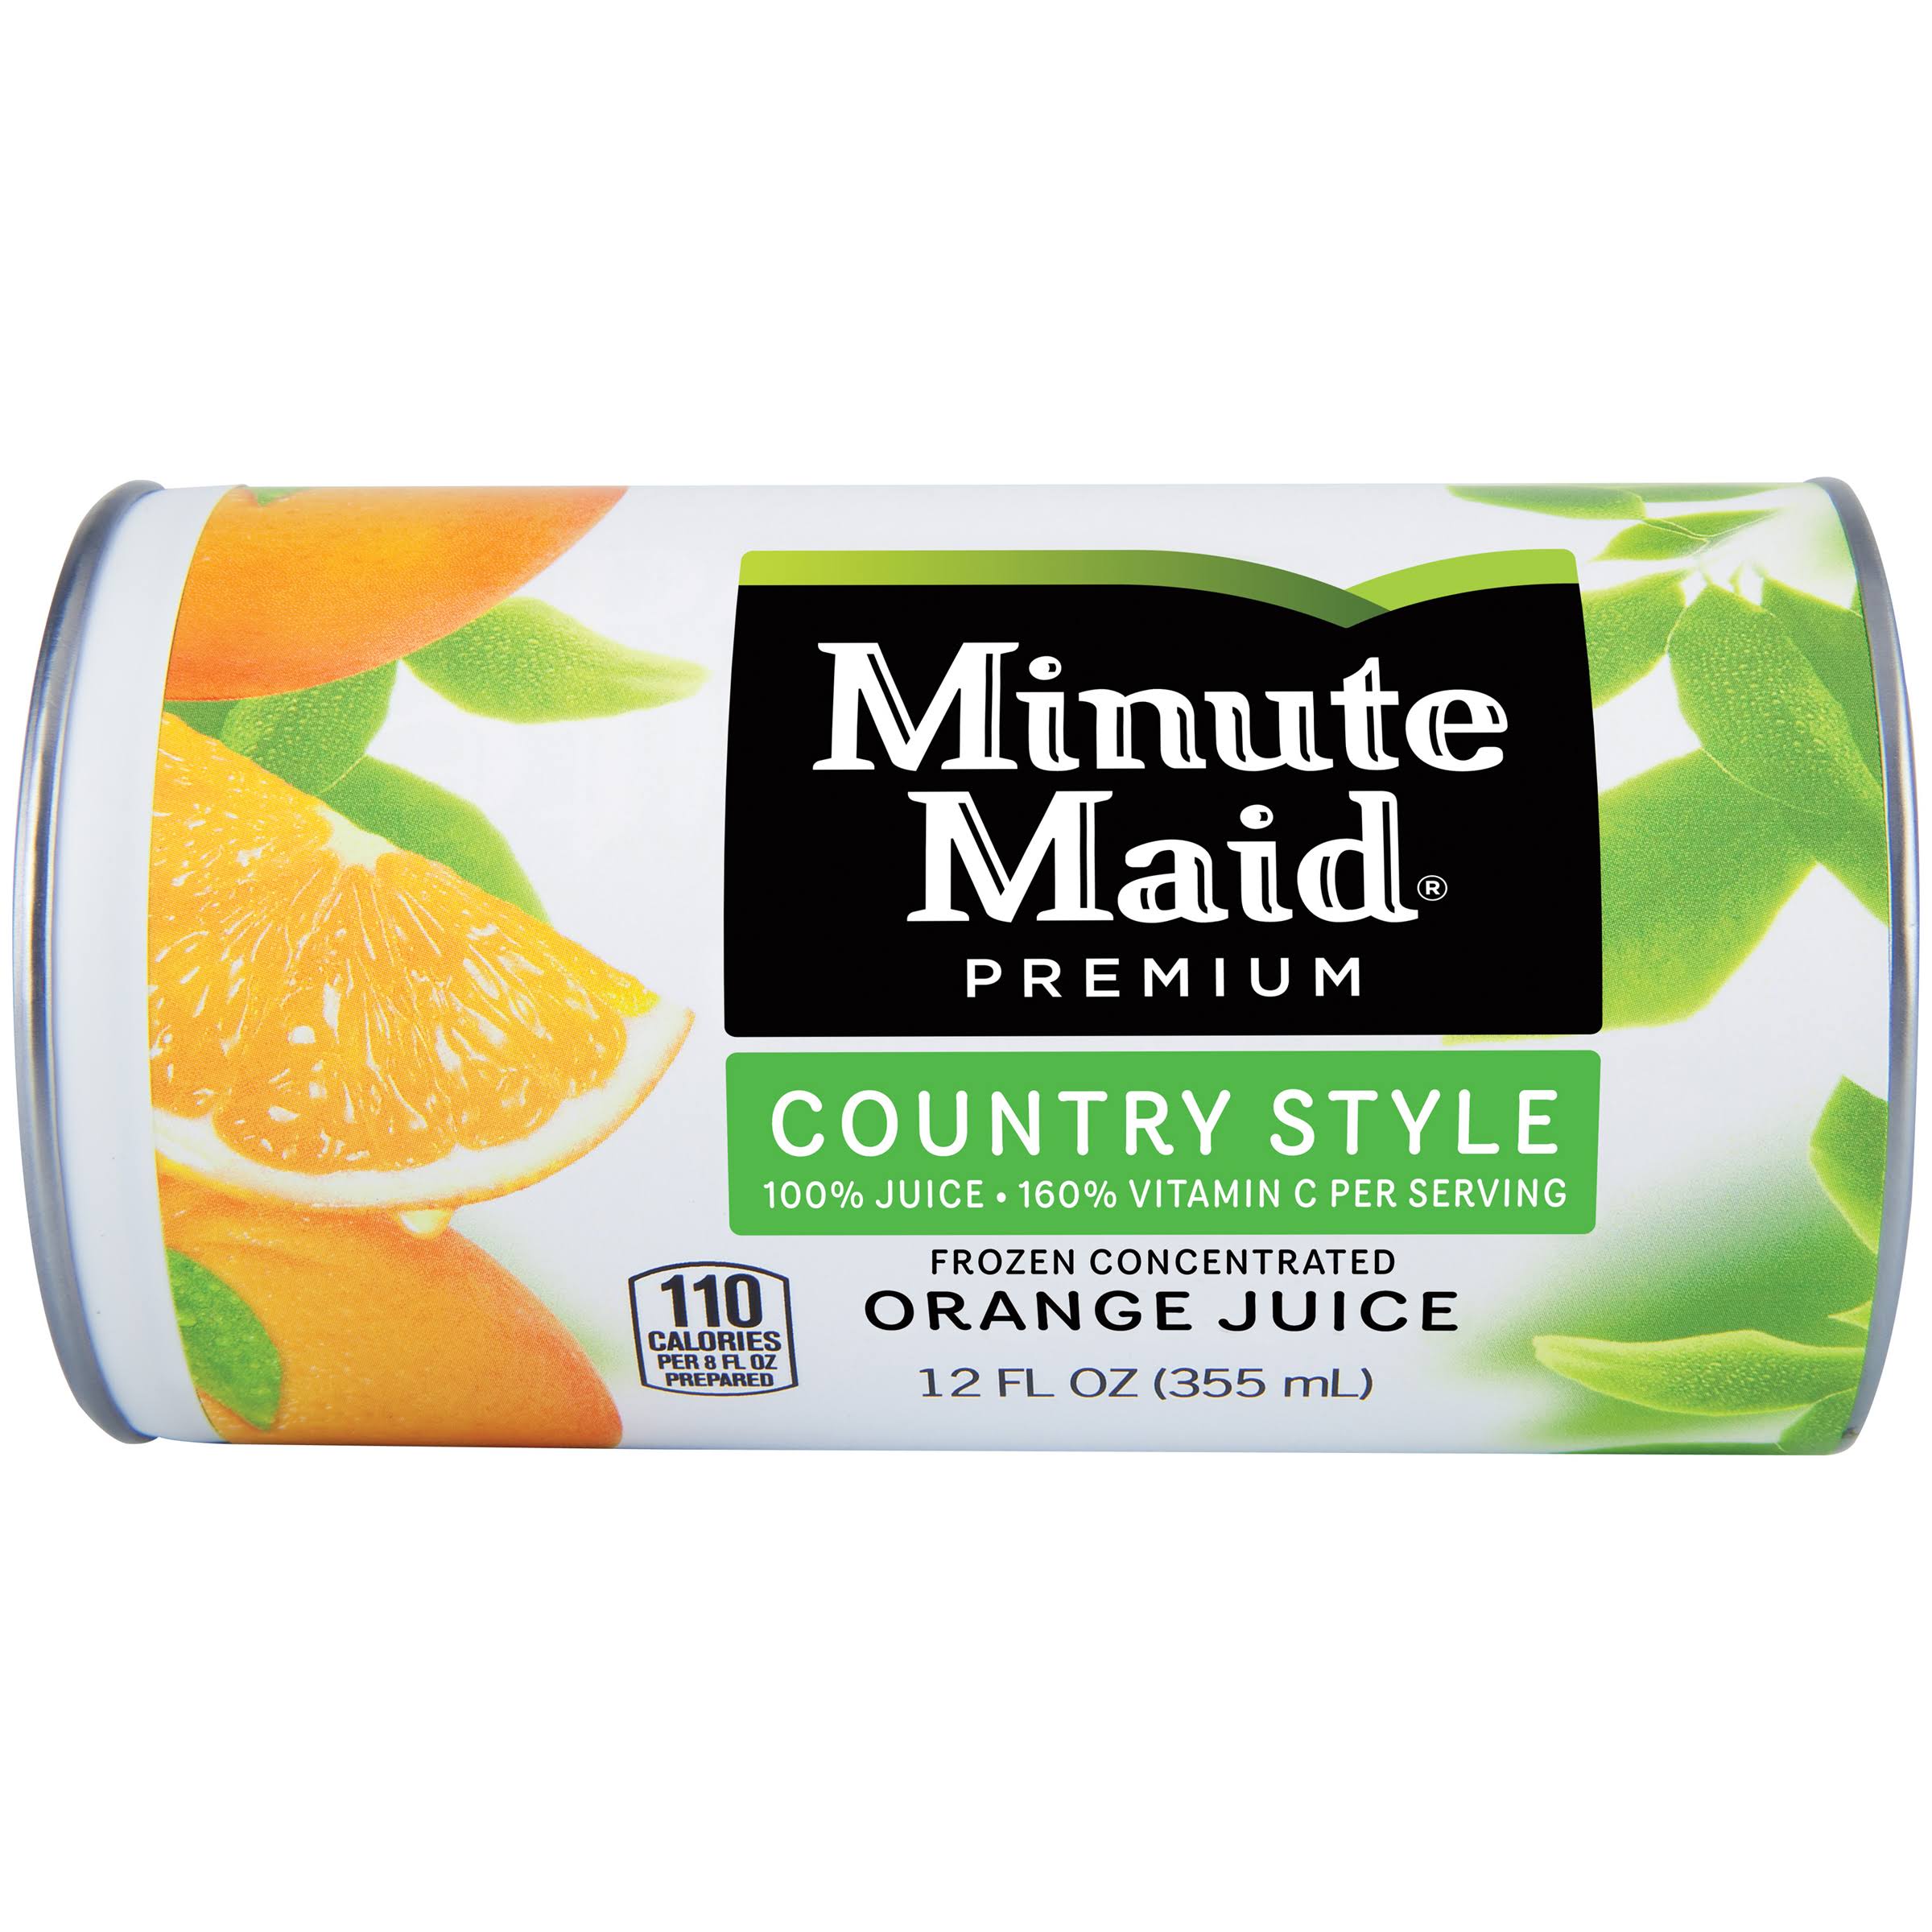 Minute Maid Premium 100% Juice, Orange, Frozen Concentrated, Country Style - 12 fl oz